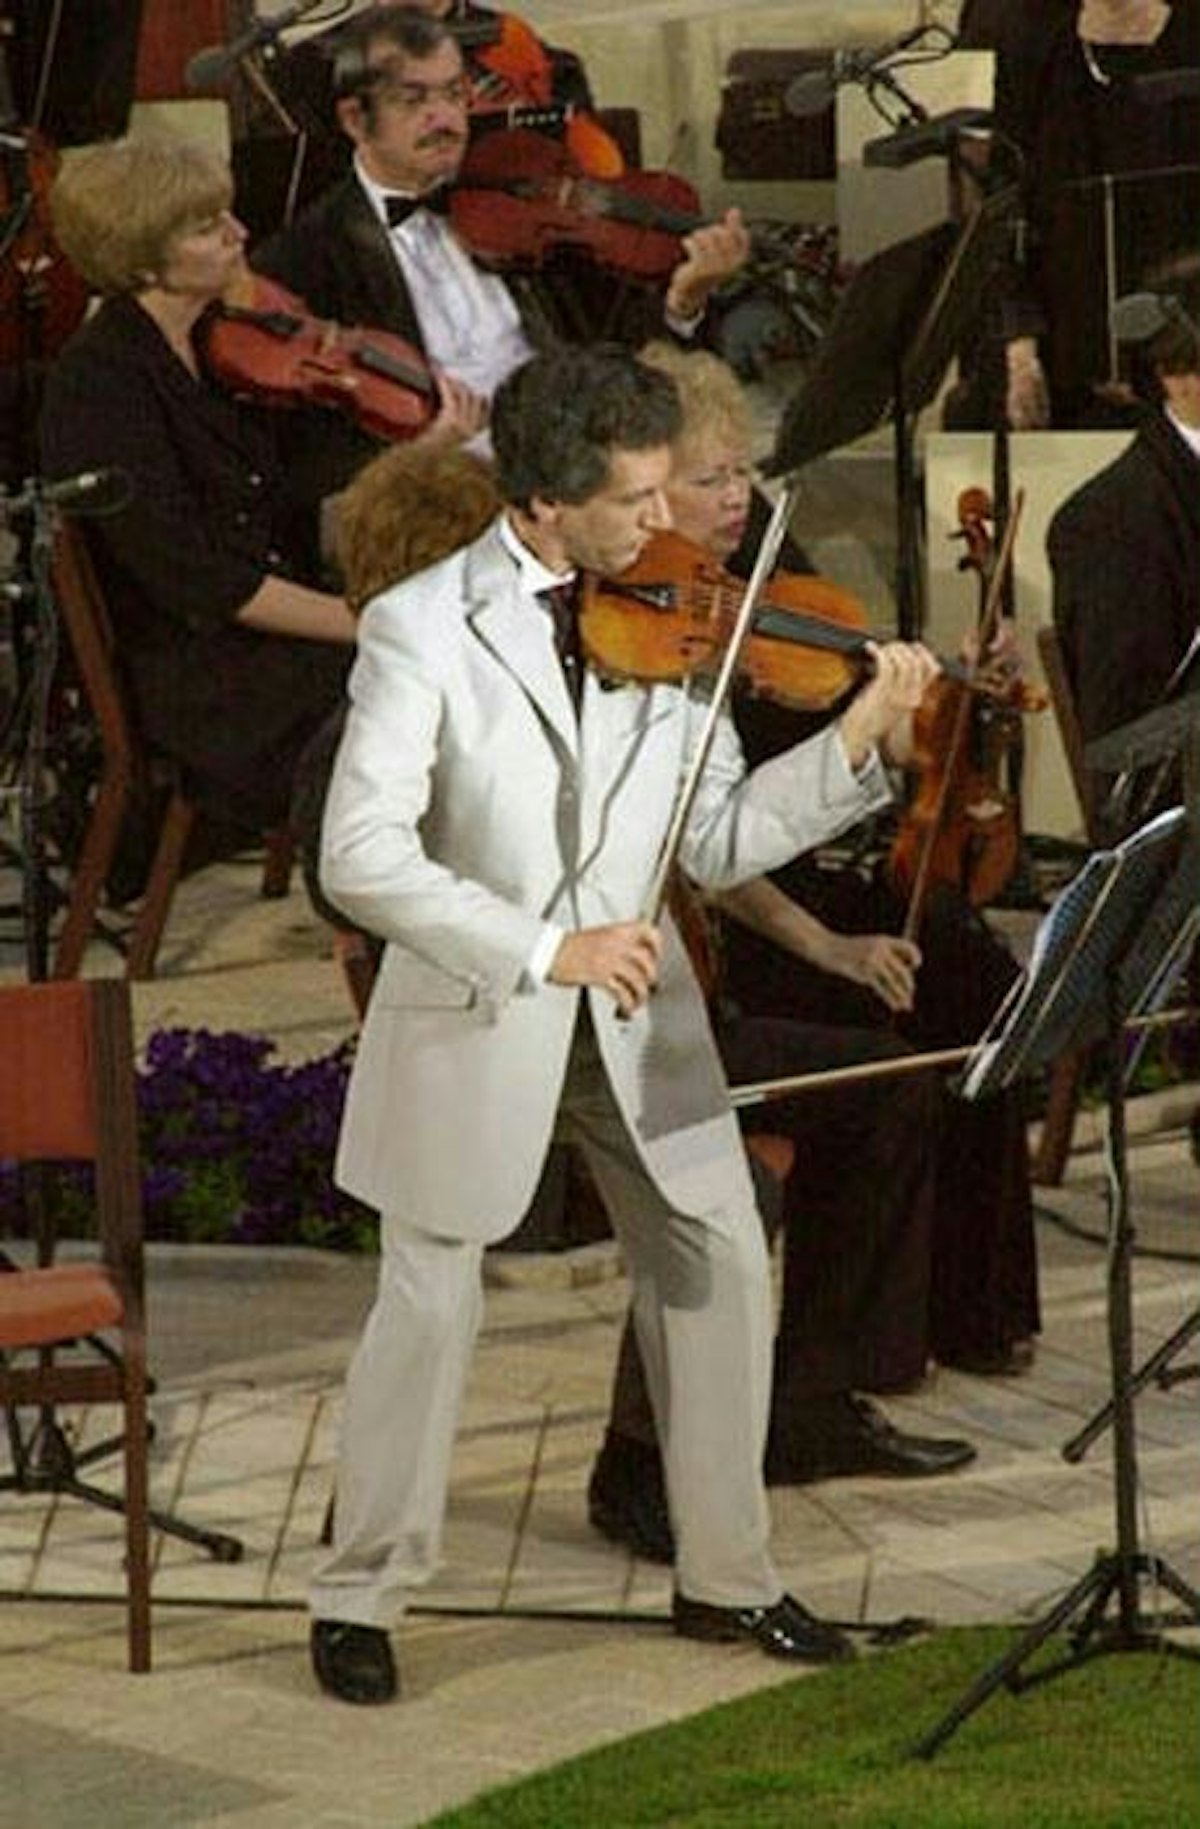 Violinist Bijan Khadem-Missagh was one of the soloists for the "Terraces of Light" oratorio.